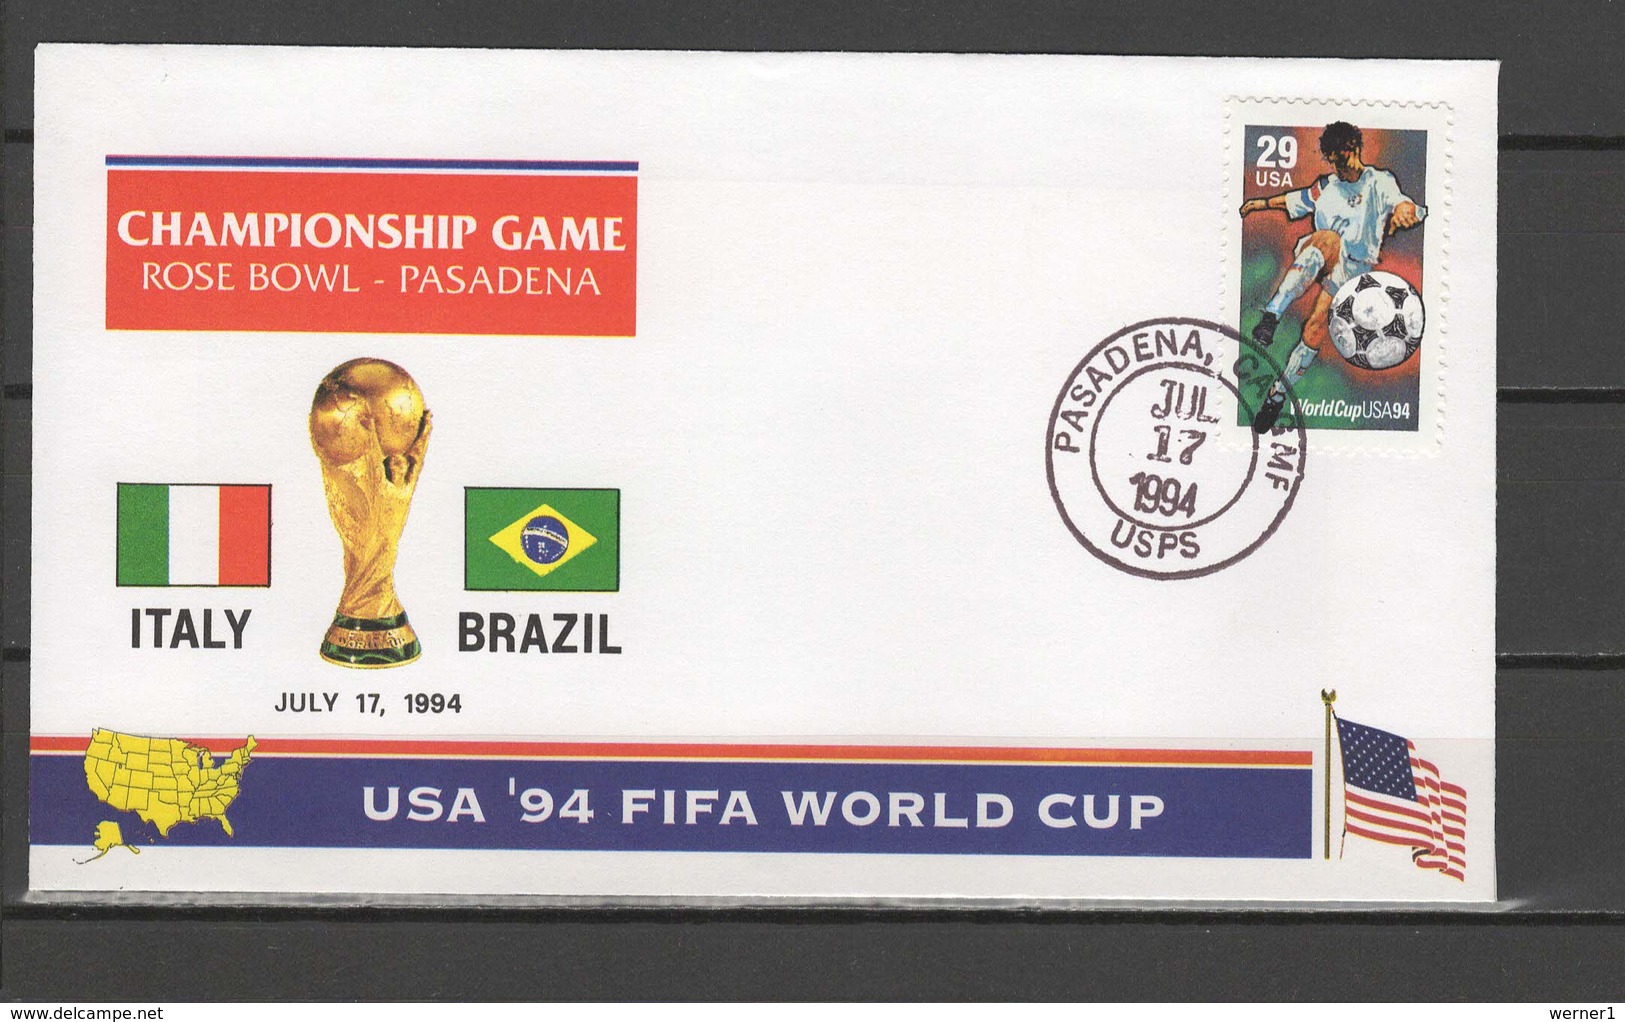 USA 1994 Football Soccer World Cup Commemorative Cover Final Match Italy - Brazil - 1994 – USA